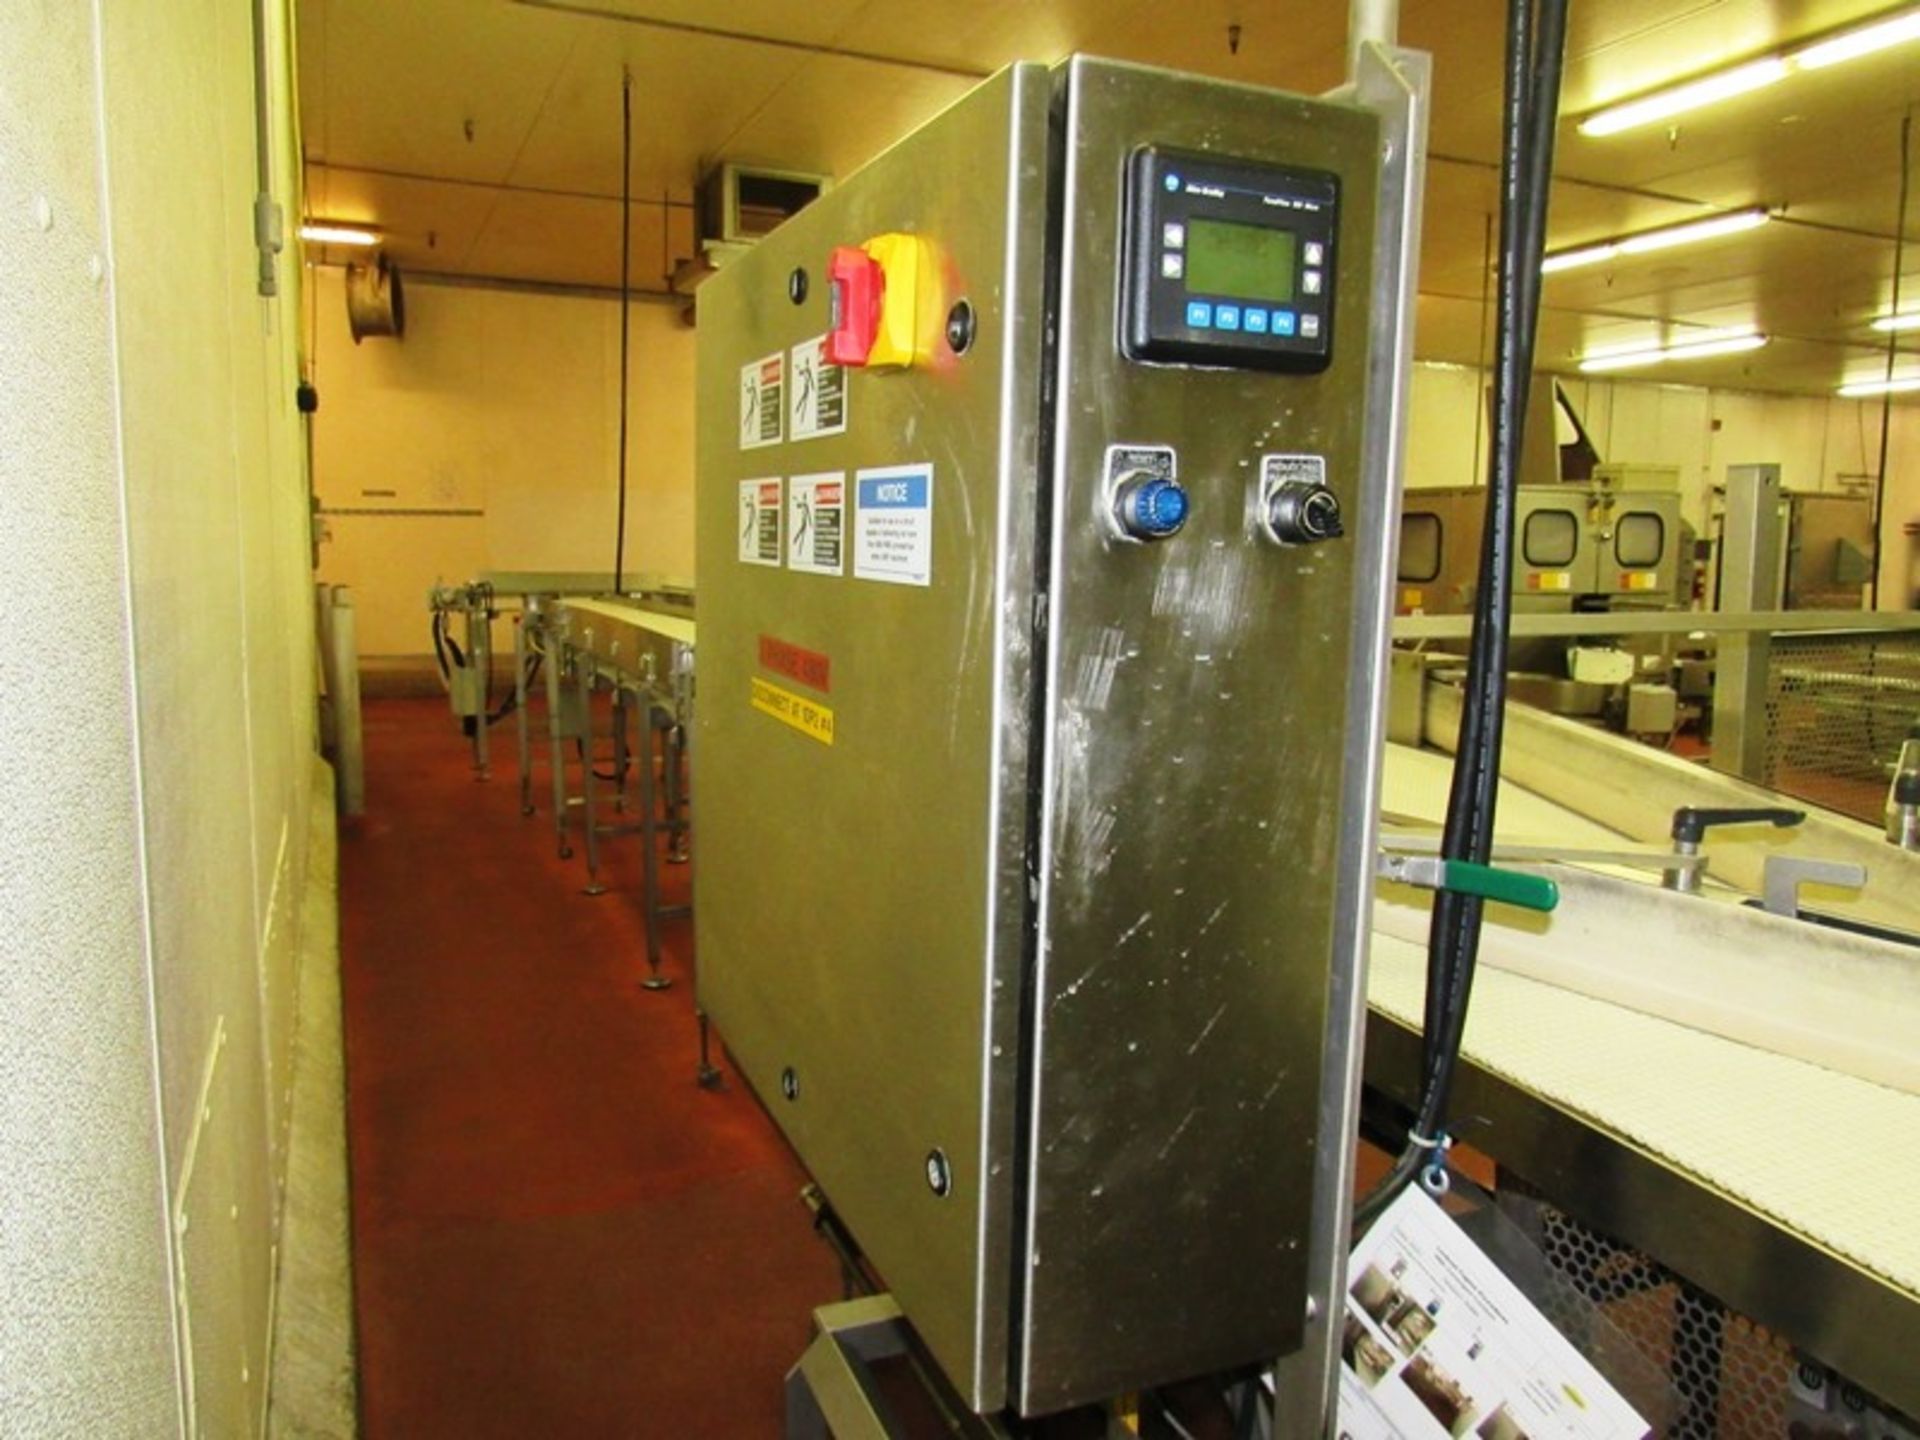 Cryovac Mdl. 8600C-16CS Old Rivers Rotary Packager, Ser. #0724131, 460 volts, with curved seal for - Image 10 of 13